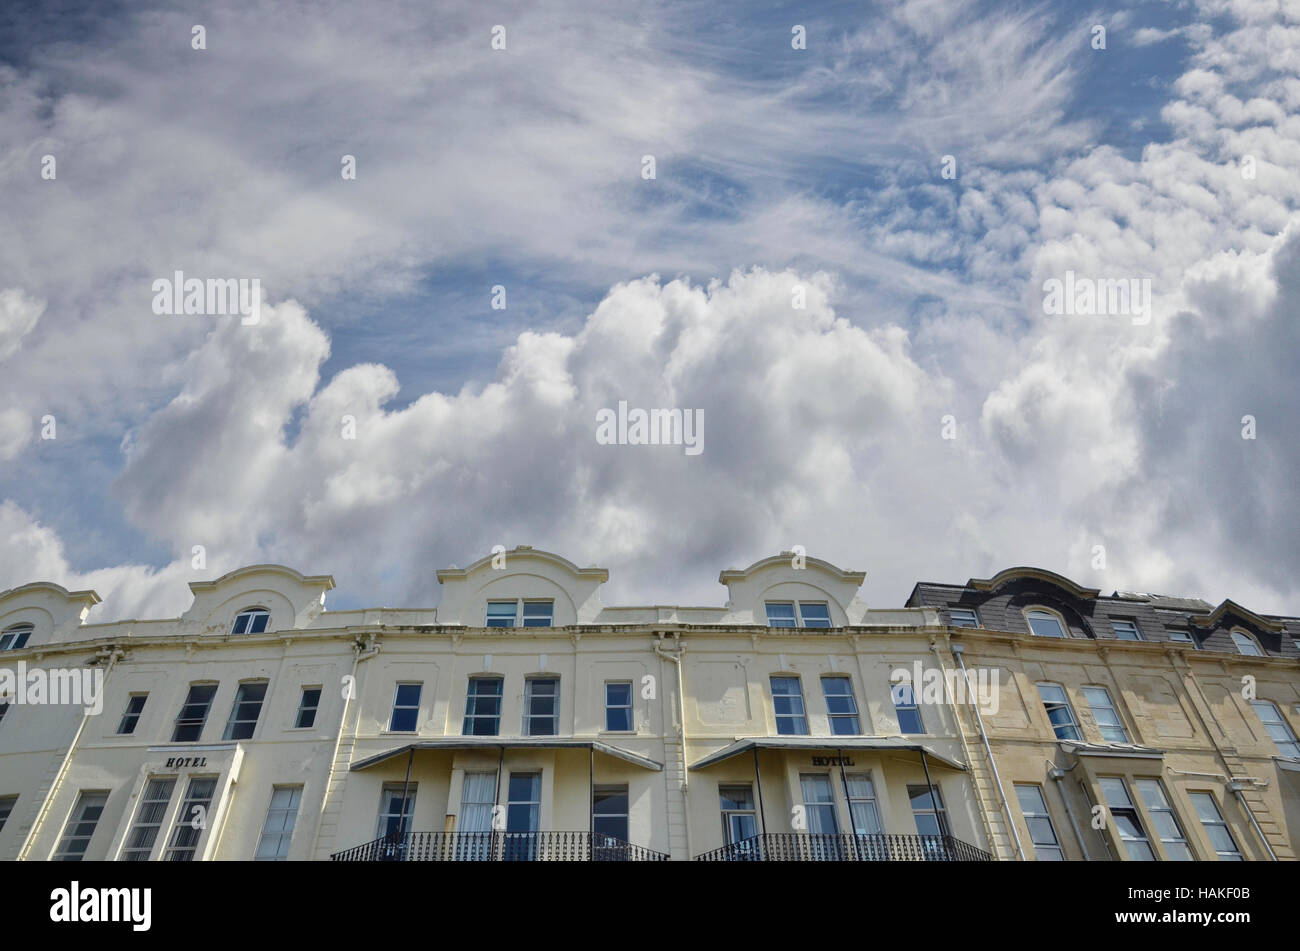 Low Angle View of Seaside Hotels, Weston Super Mare, England, UK Stock Photo